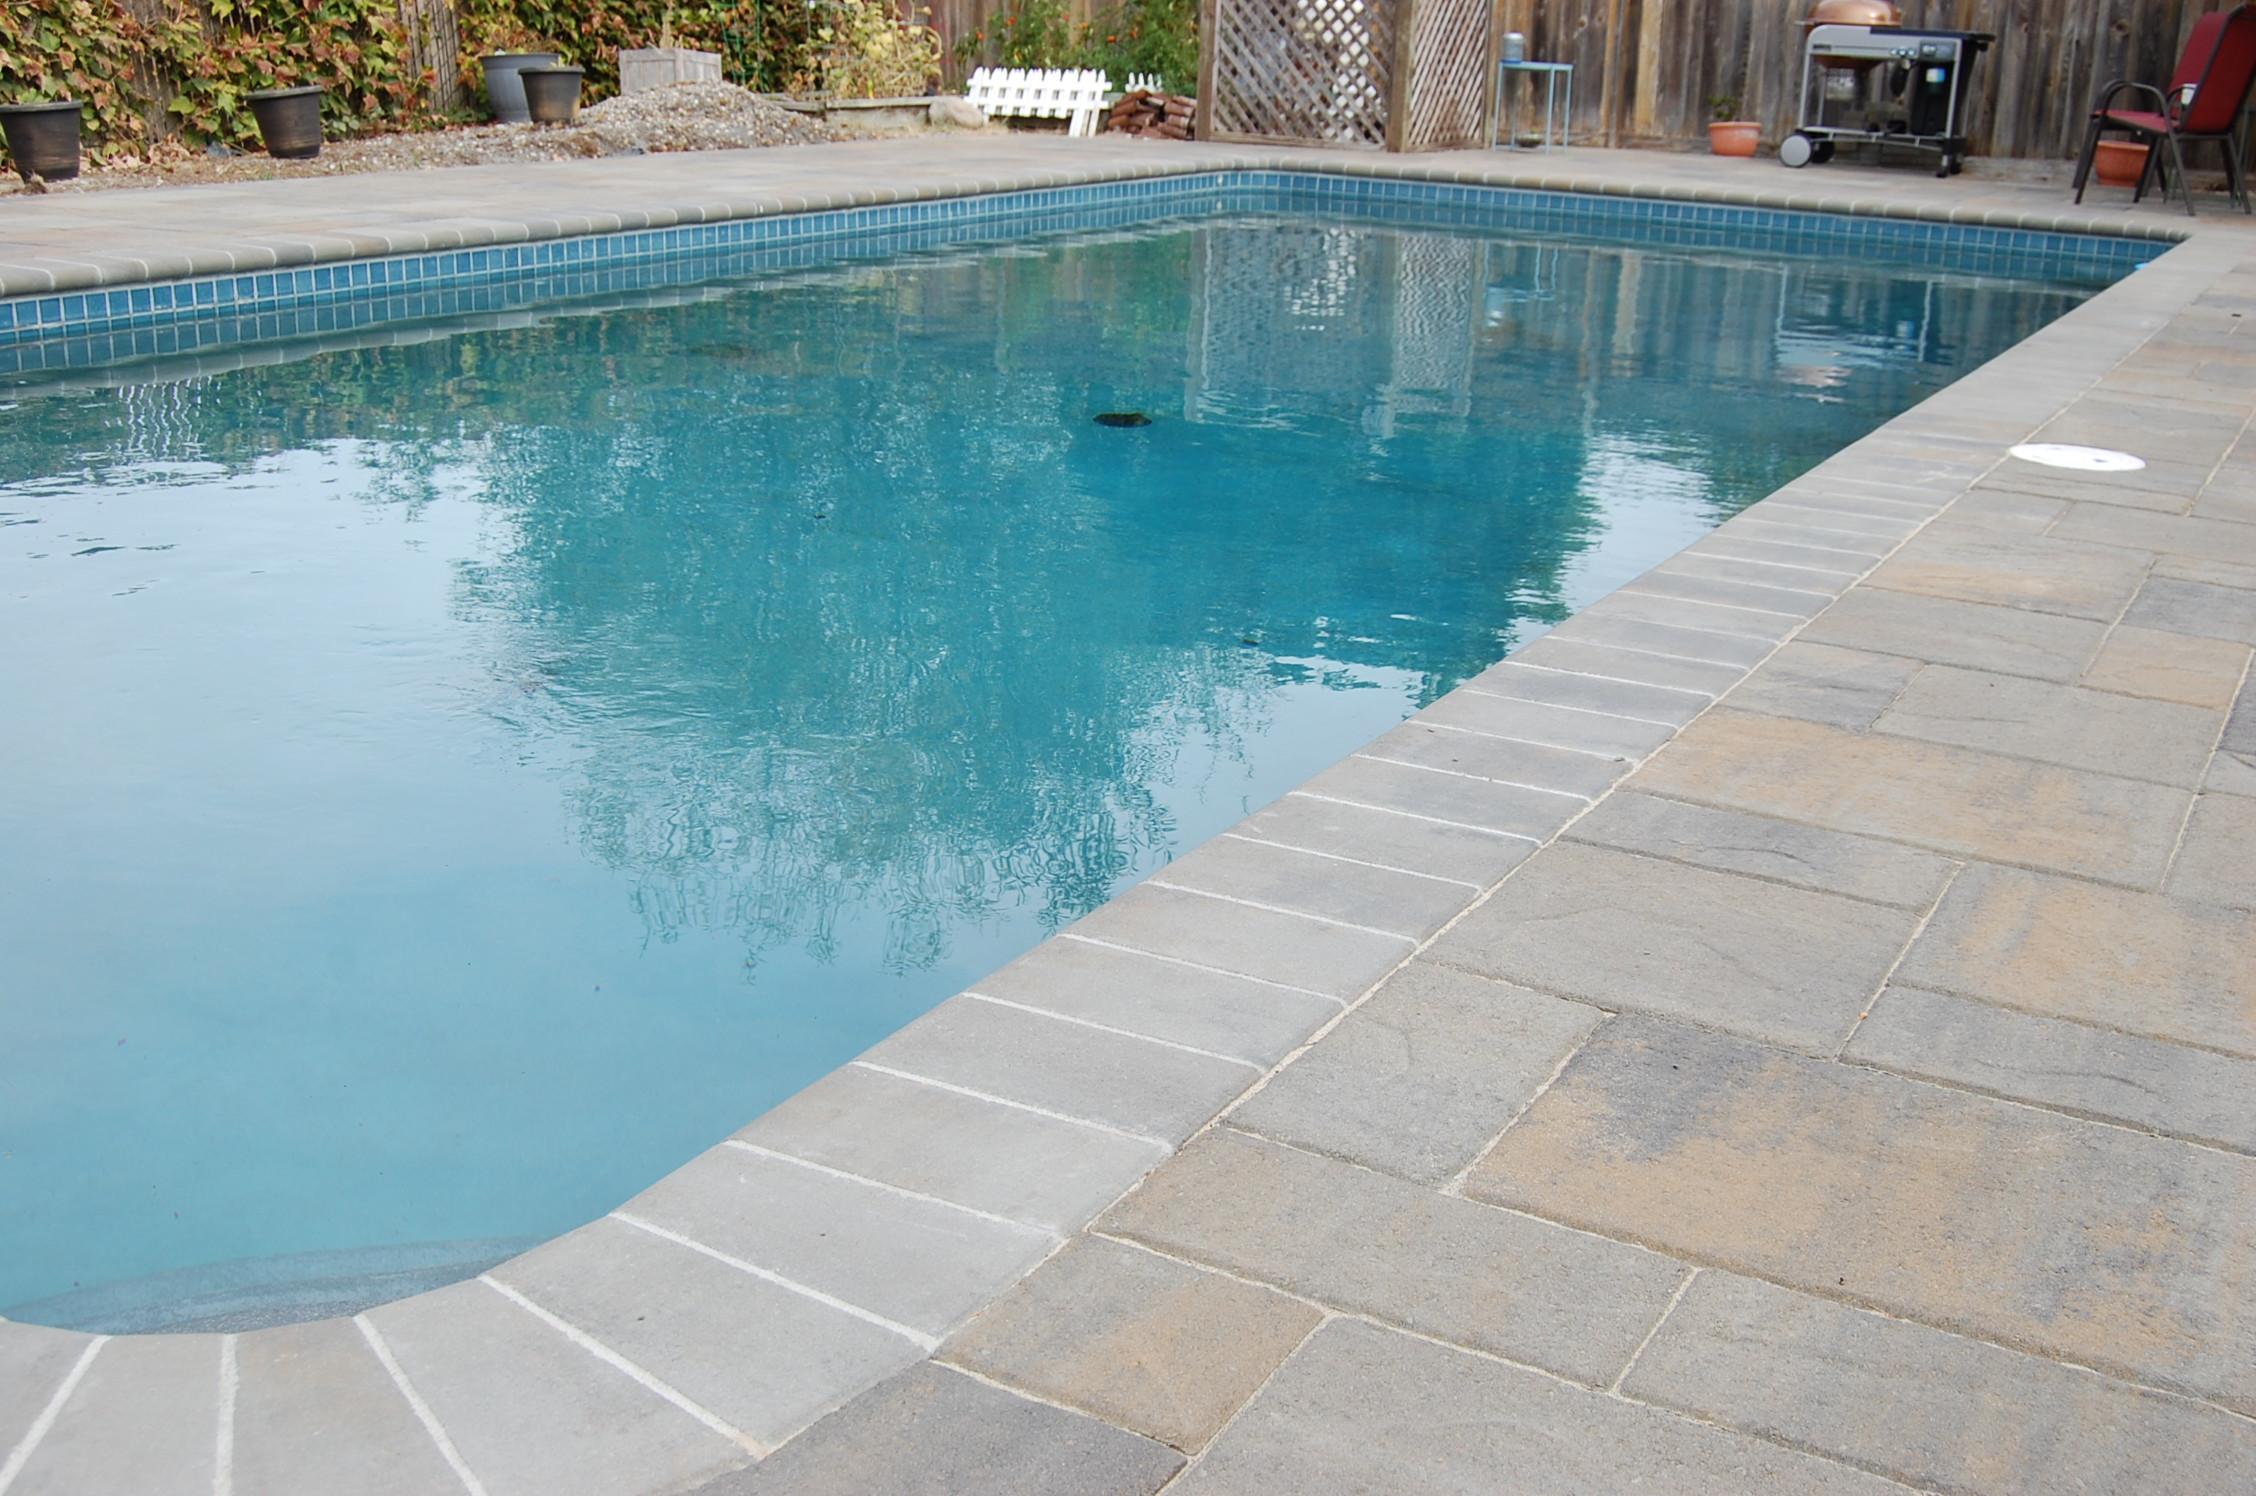 Picture of The Legacy Paver Group installed this pool deck. - The Legacy Paver Group